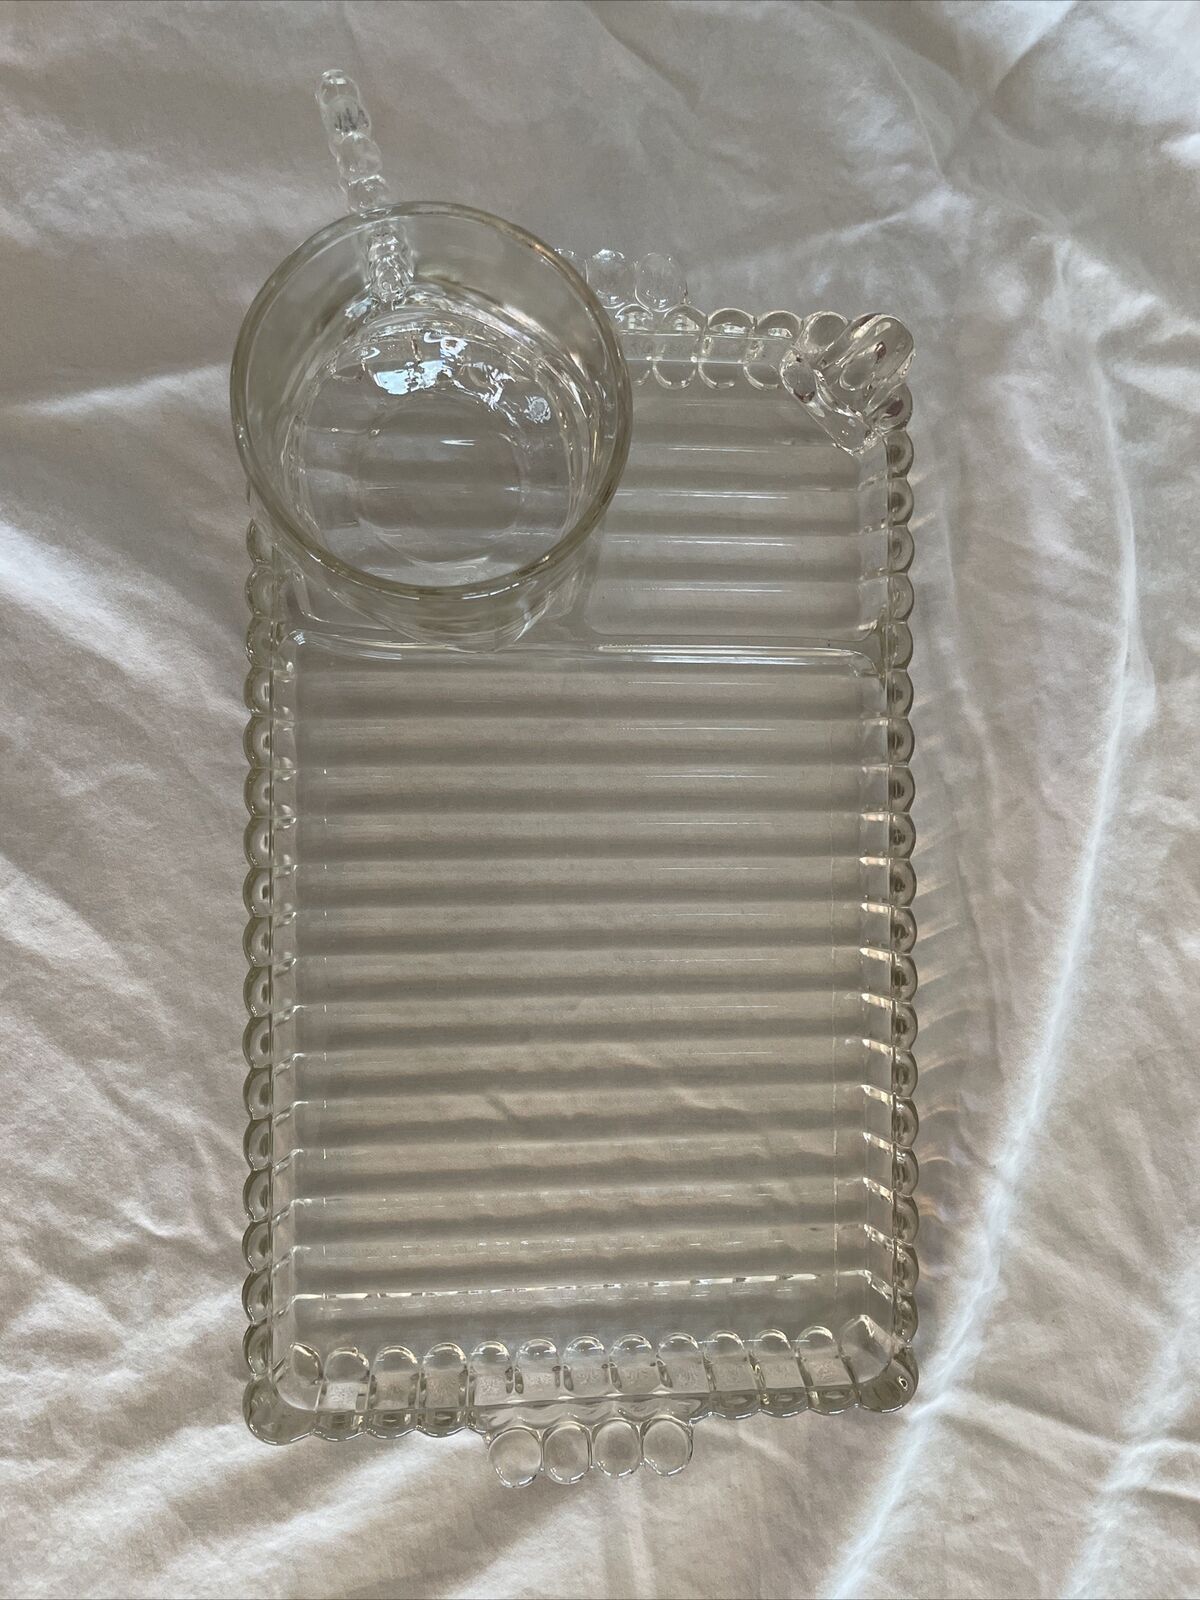 Vintage 1930s Hazel Atlas Snack, Sip & Smoke Clear Glass Tray with Cup